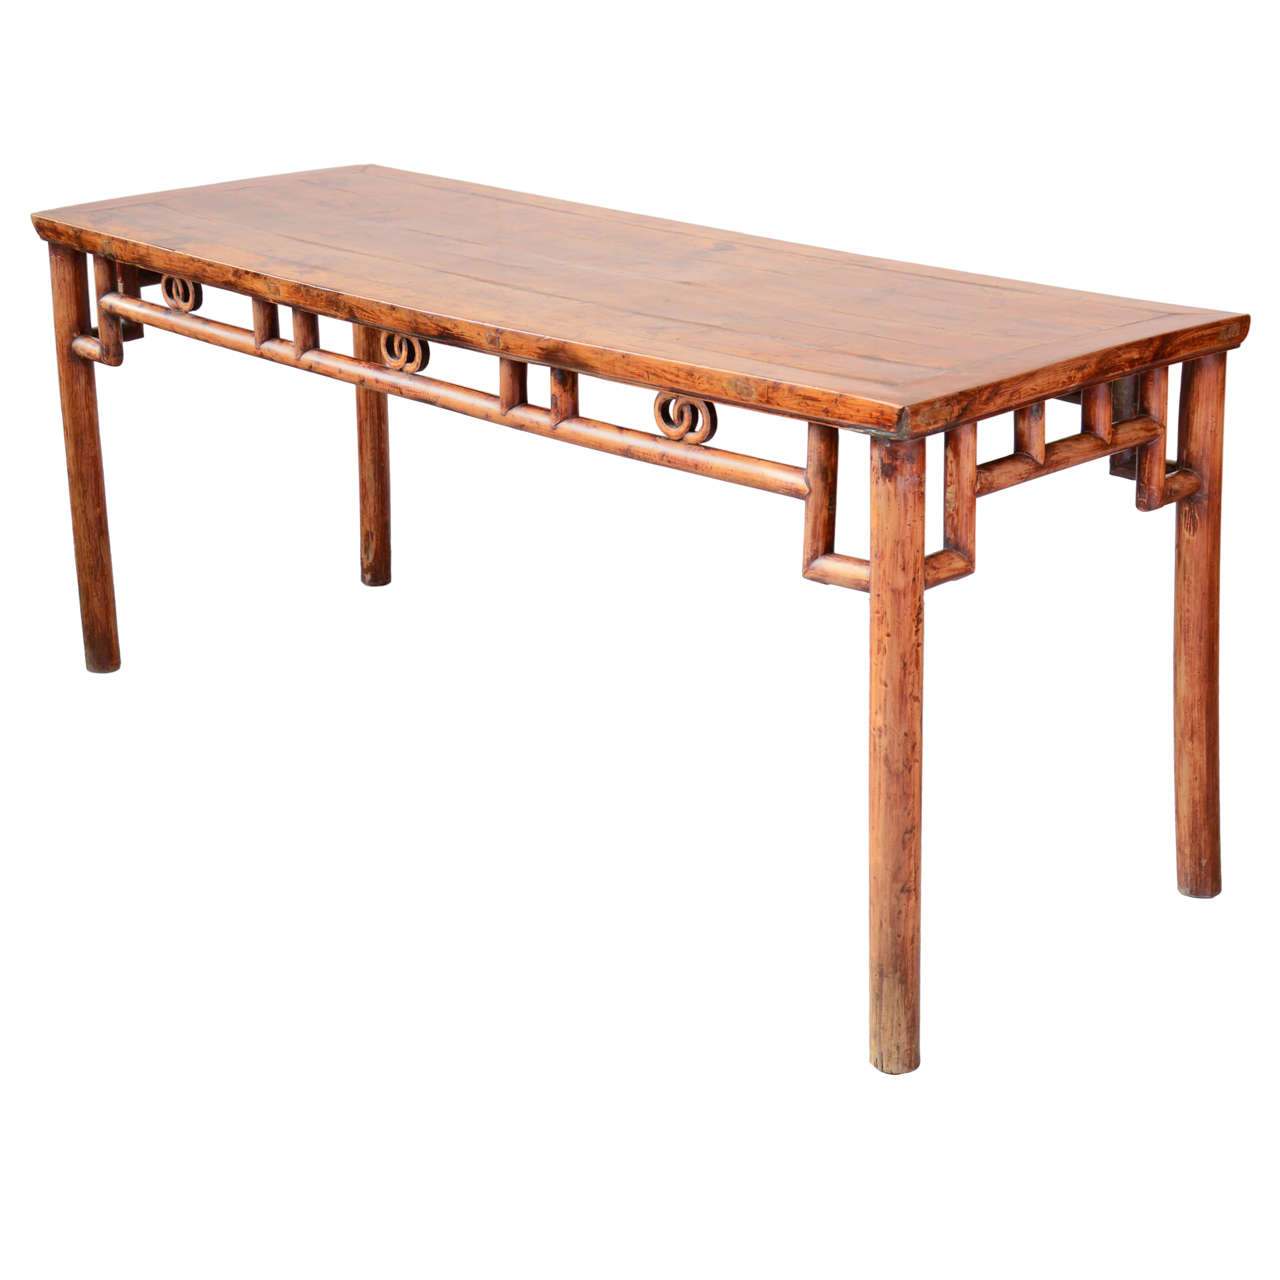 19th Century Chinese Painting Table In Cypress Wood For Sale